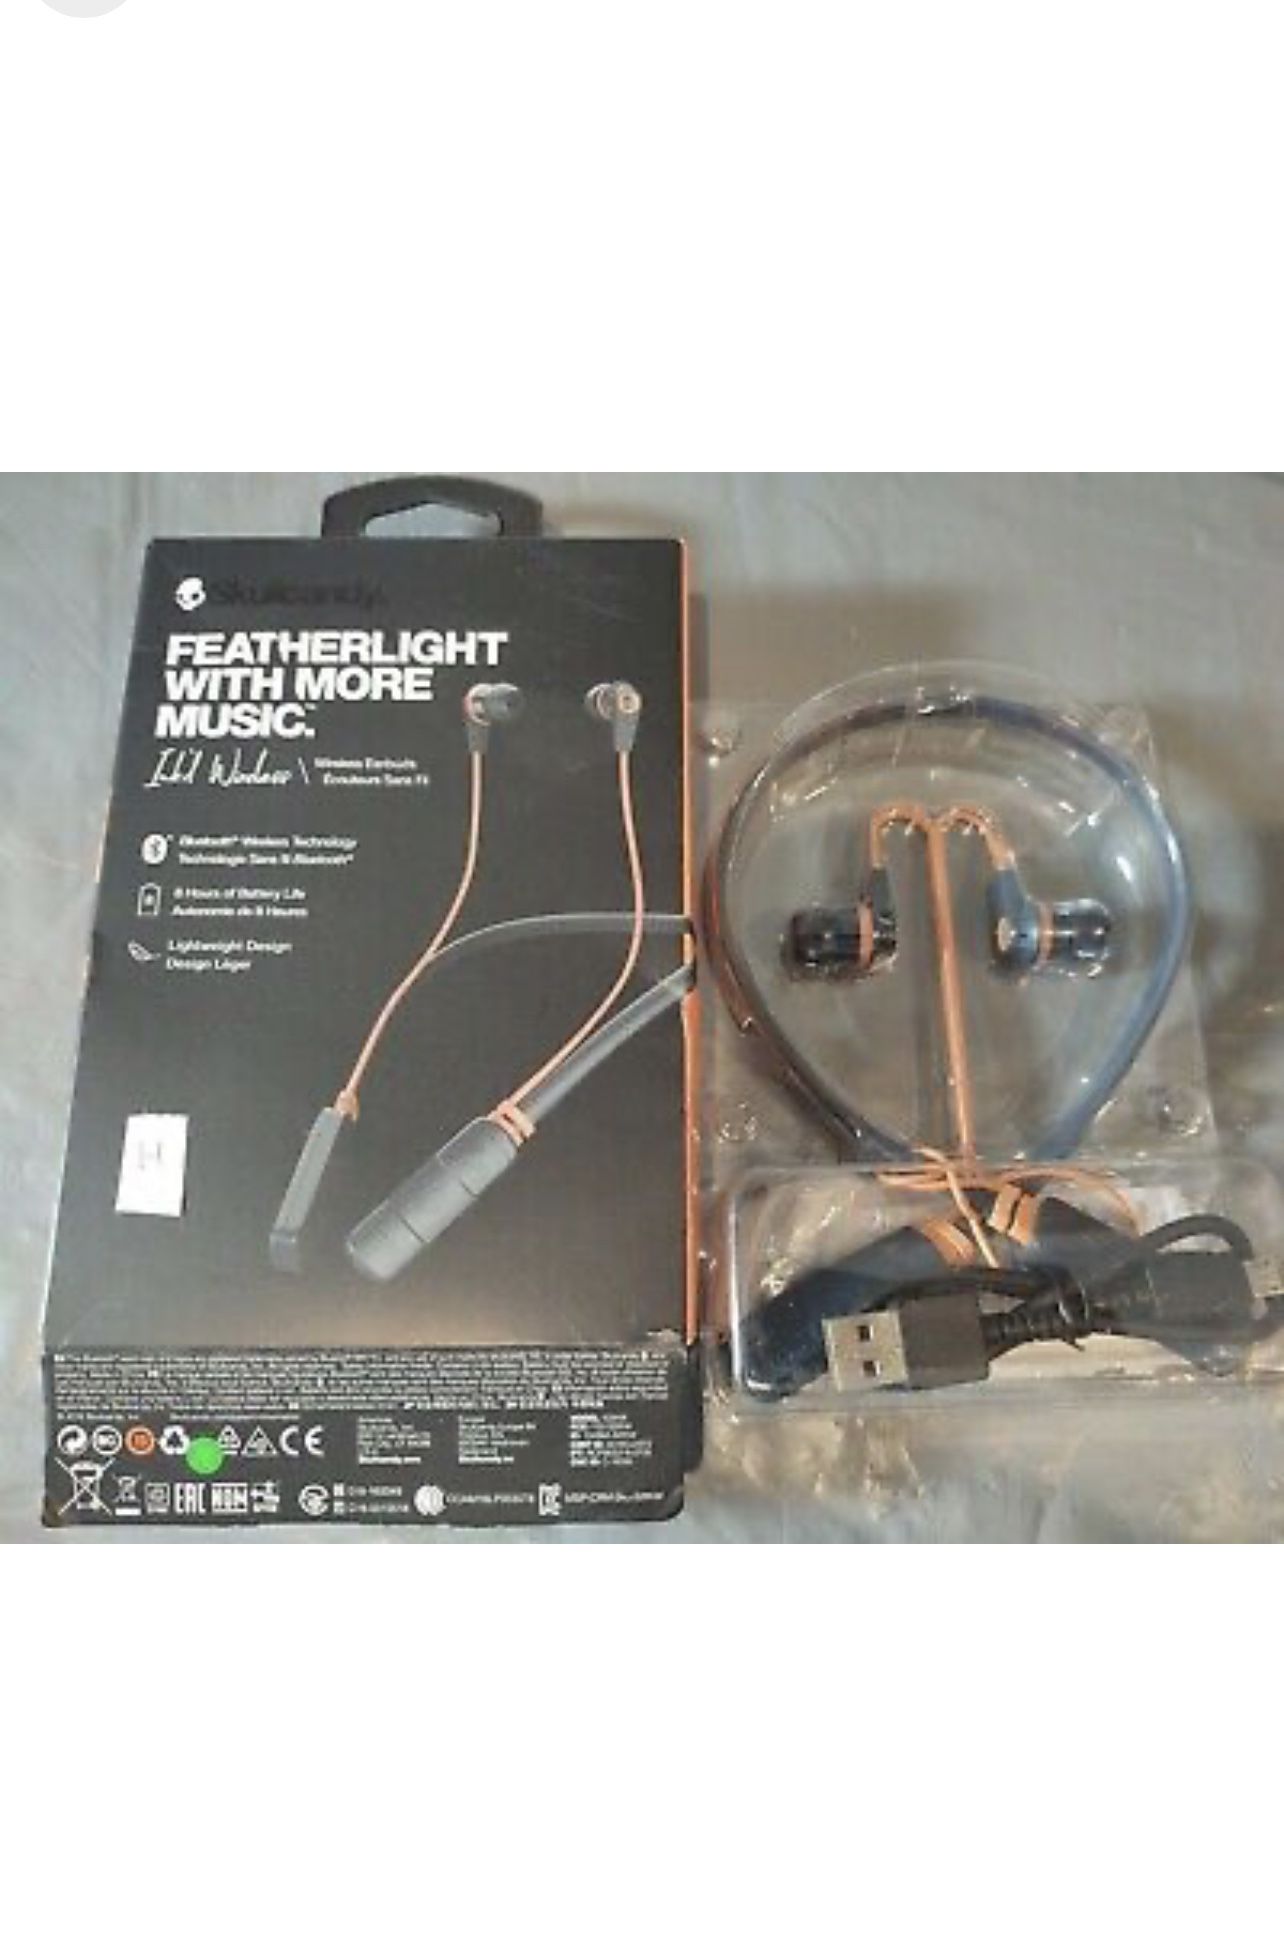 Skullcandy Featherlight With More Music New Open Box